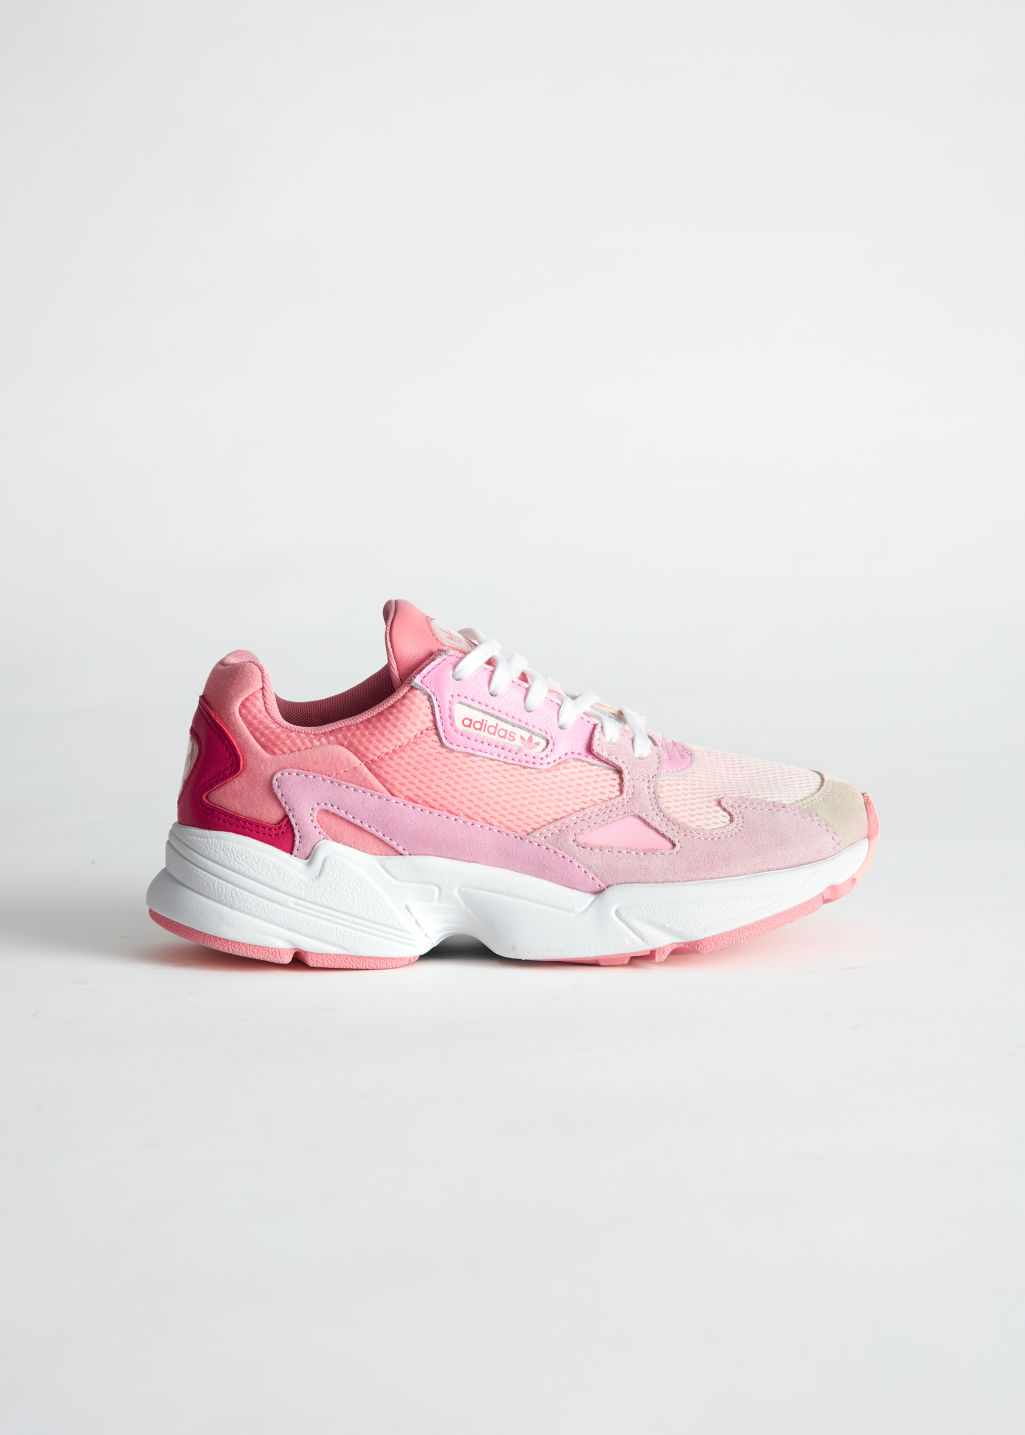 adidas Falcon - Pink - Adidas - & Other Stories